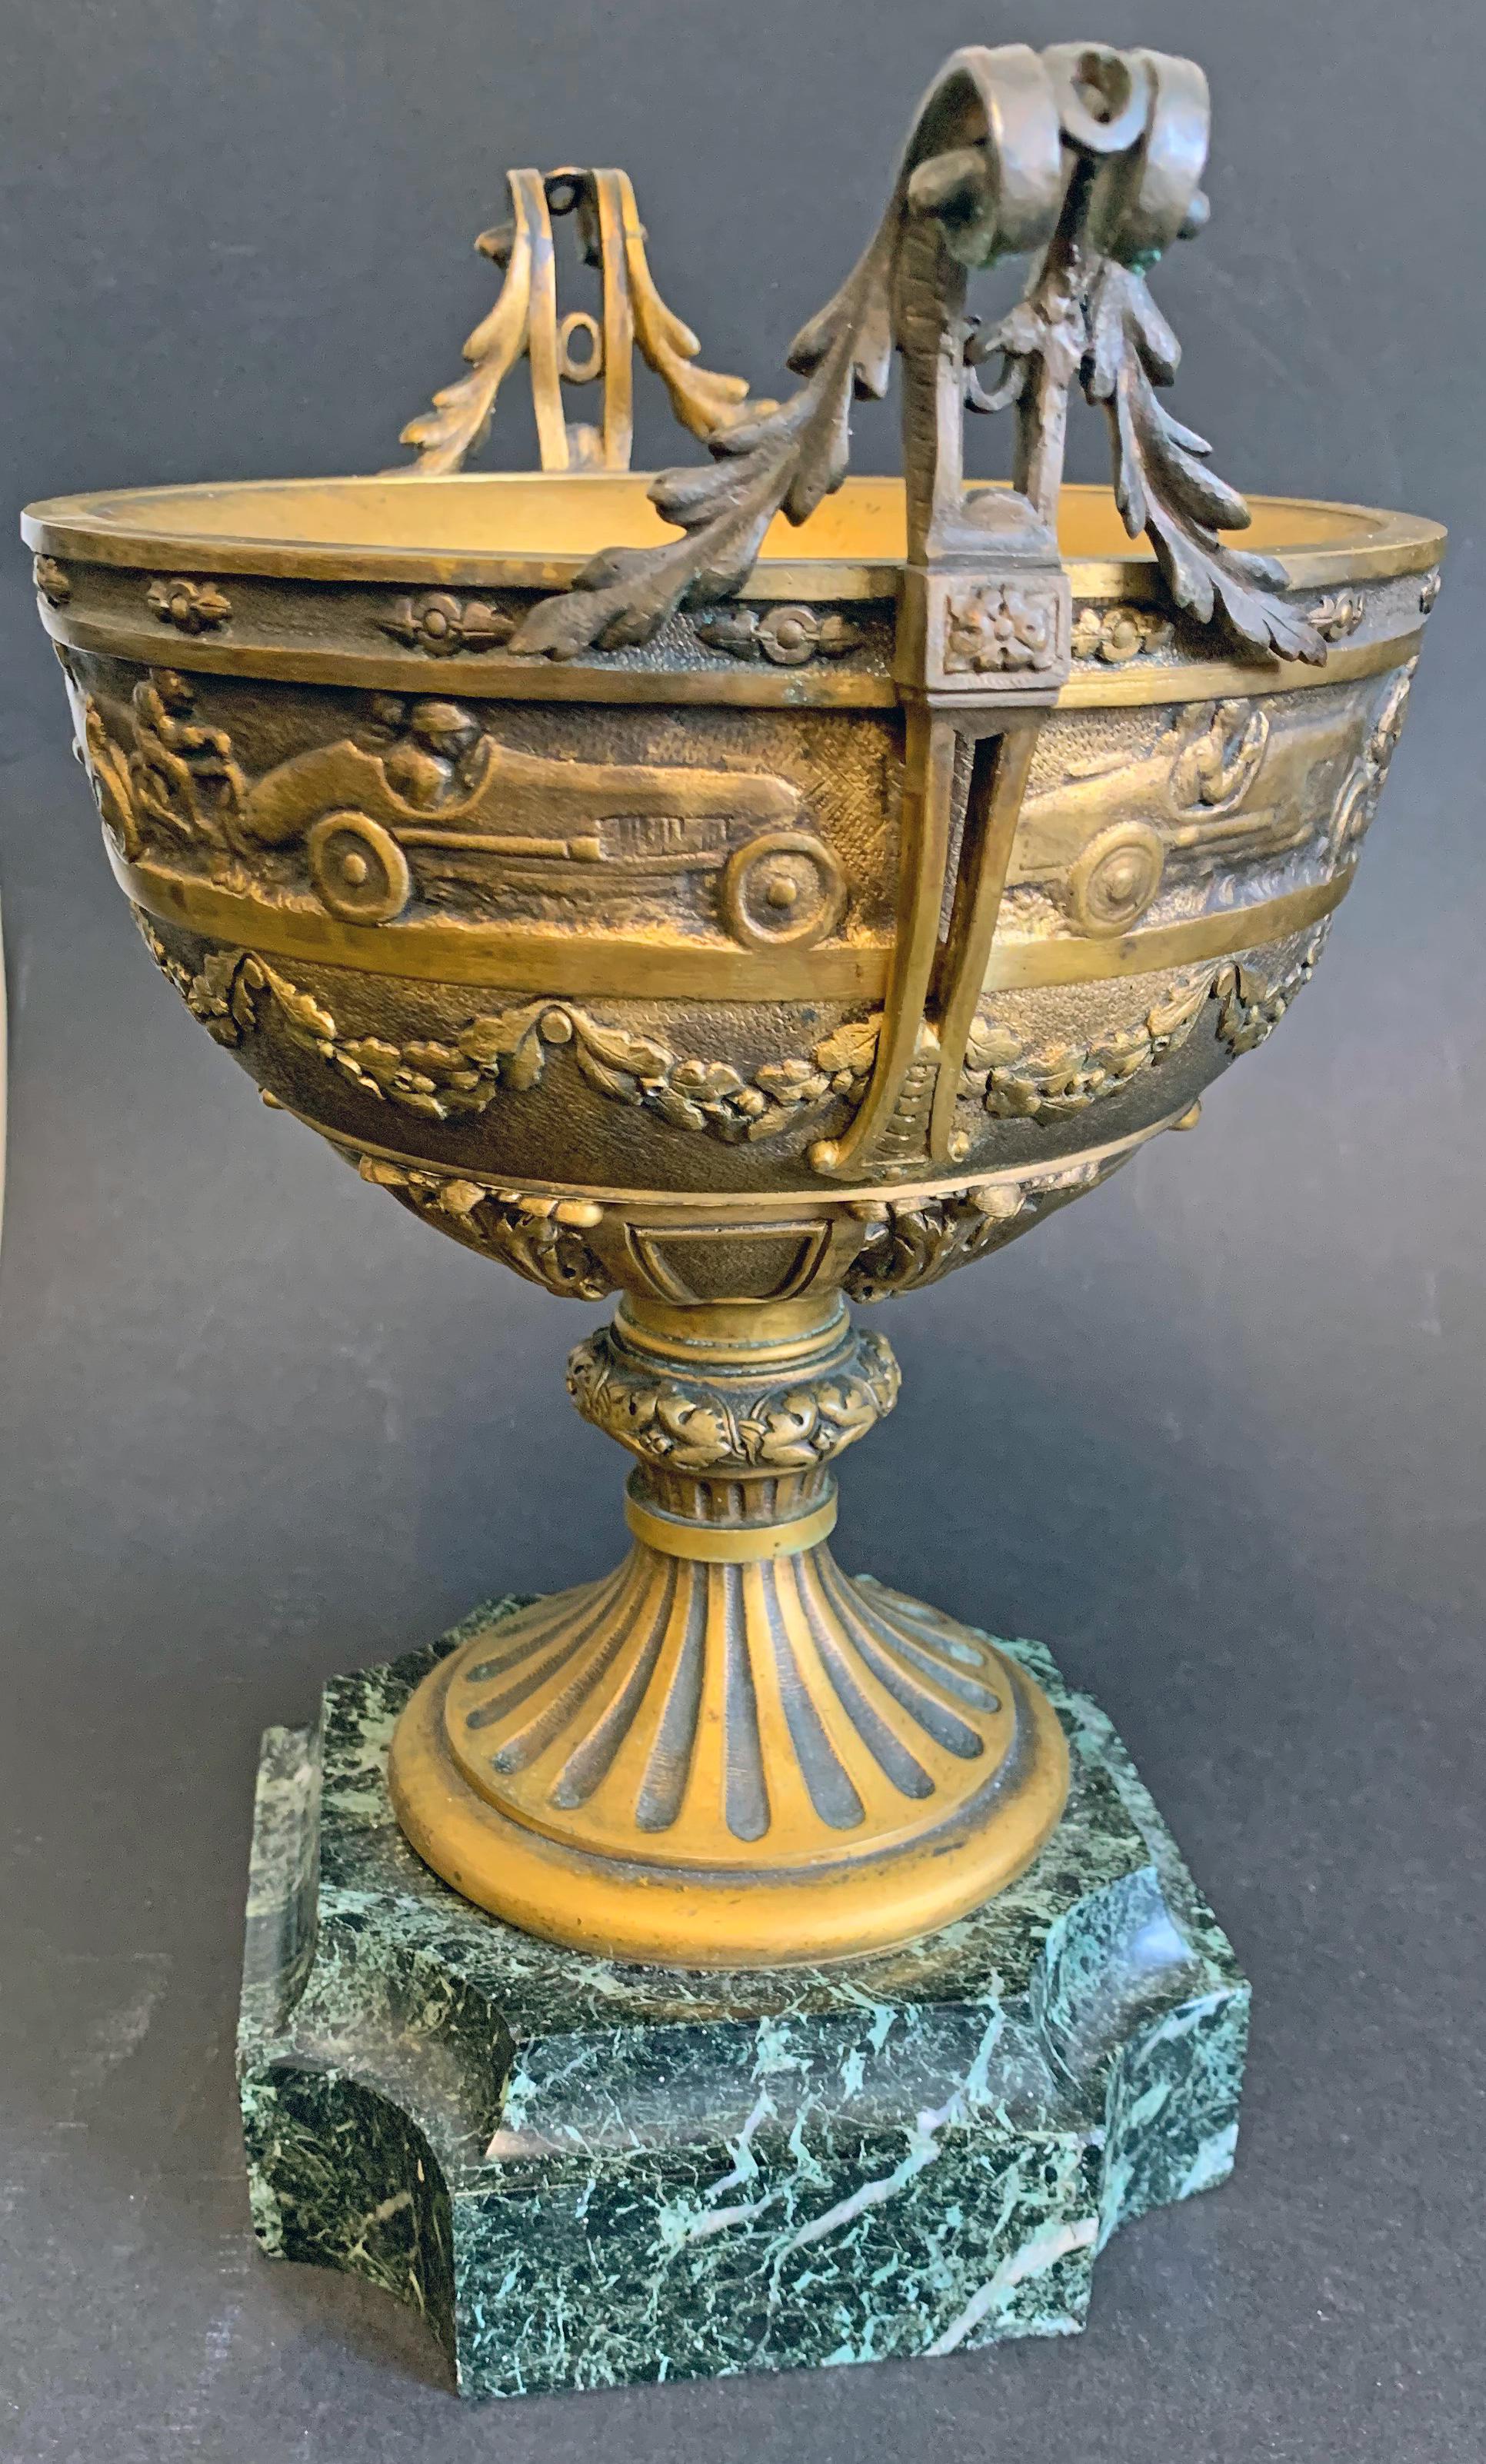 Rare, perhaps unique, this beautifully sculpted and cast bronze cup features a frieze of racing cars and motorcycles in the heat of the race, above a series of garlands with oaks leaves and acorns, foliate motifs and a fluted base. Signed 